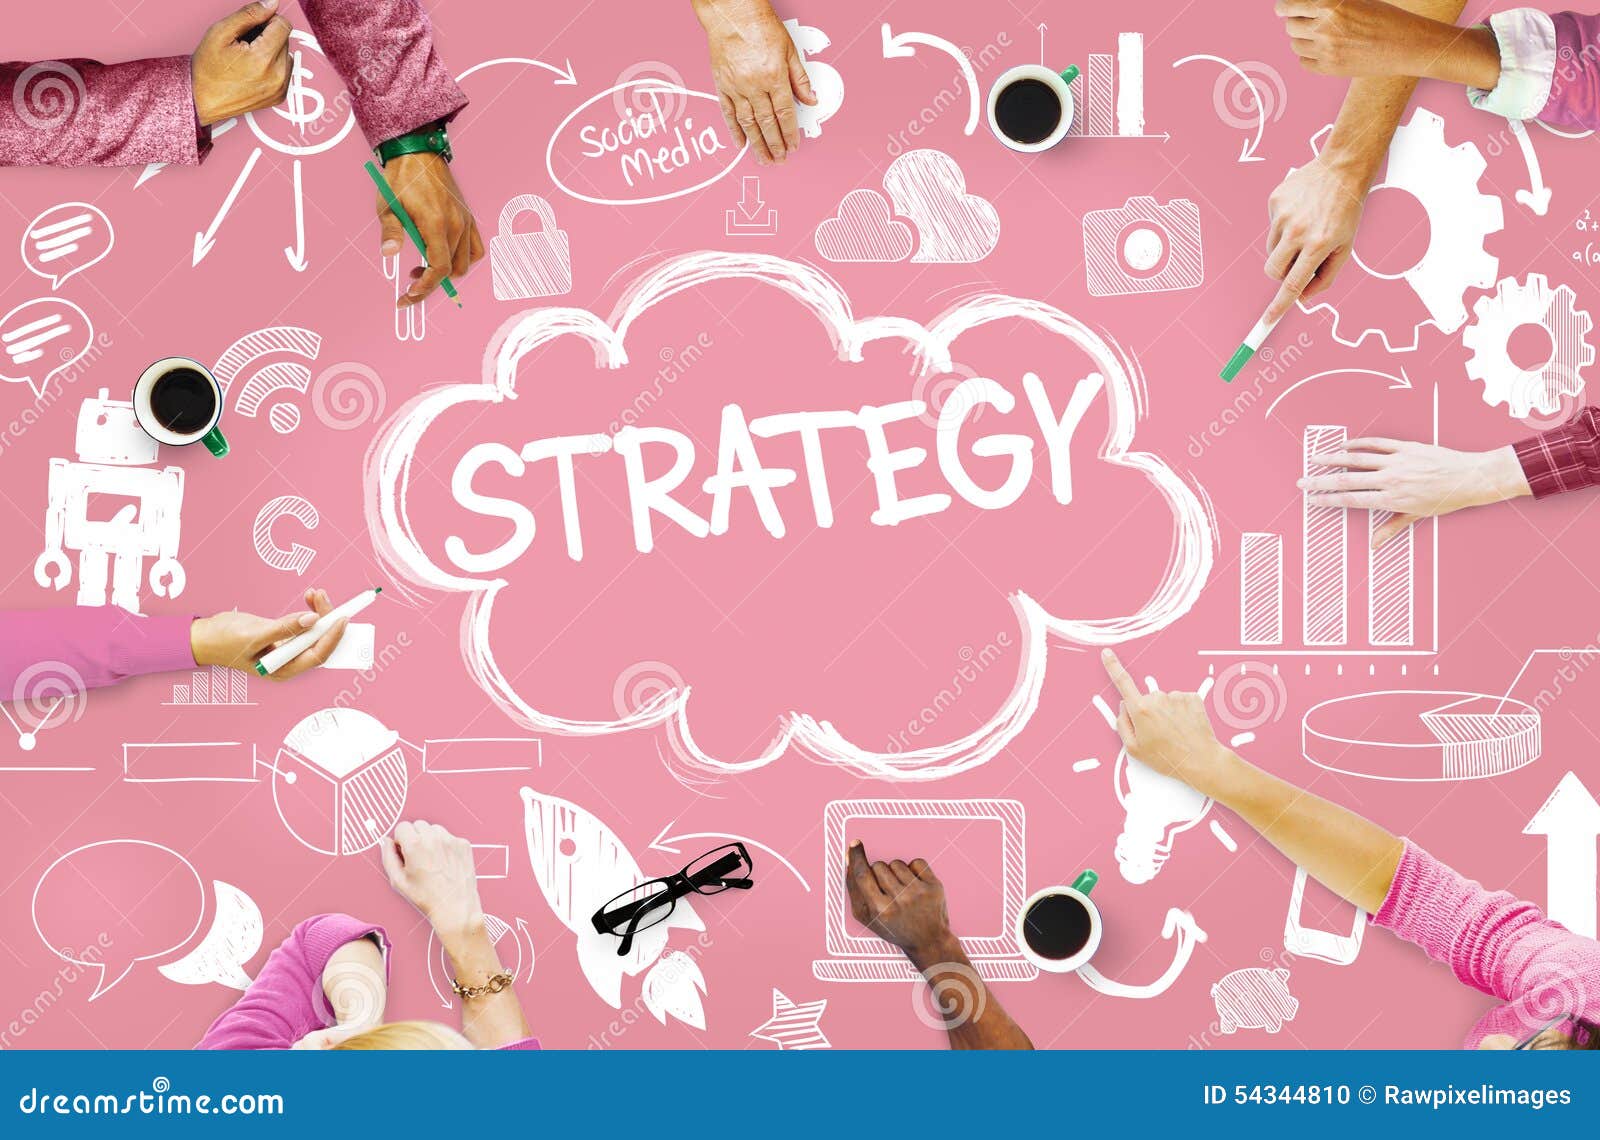 strategy online social media networking marketing concept